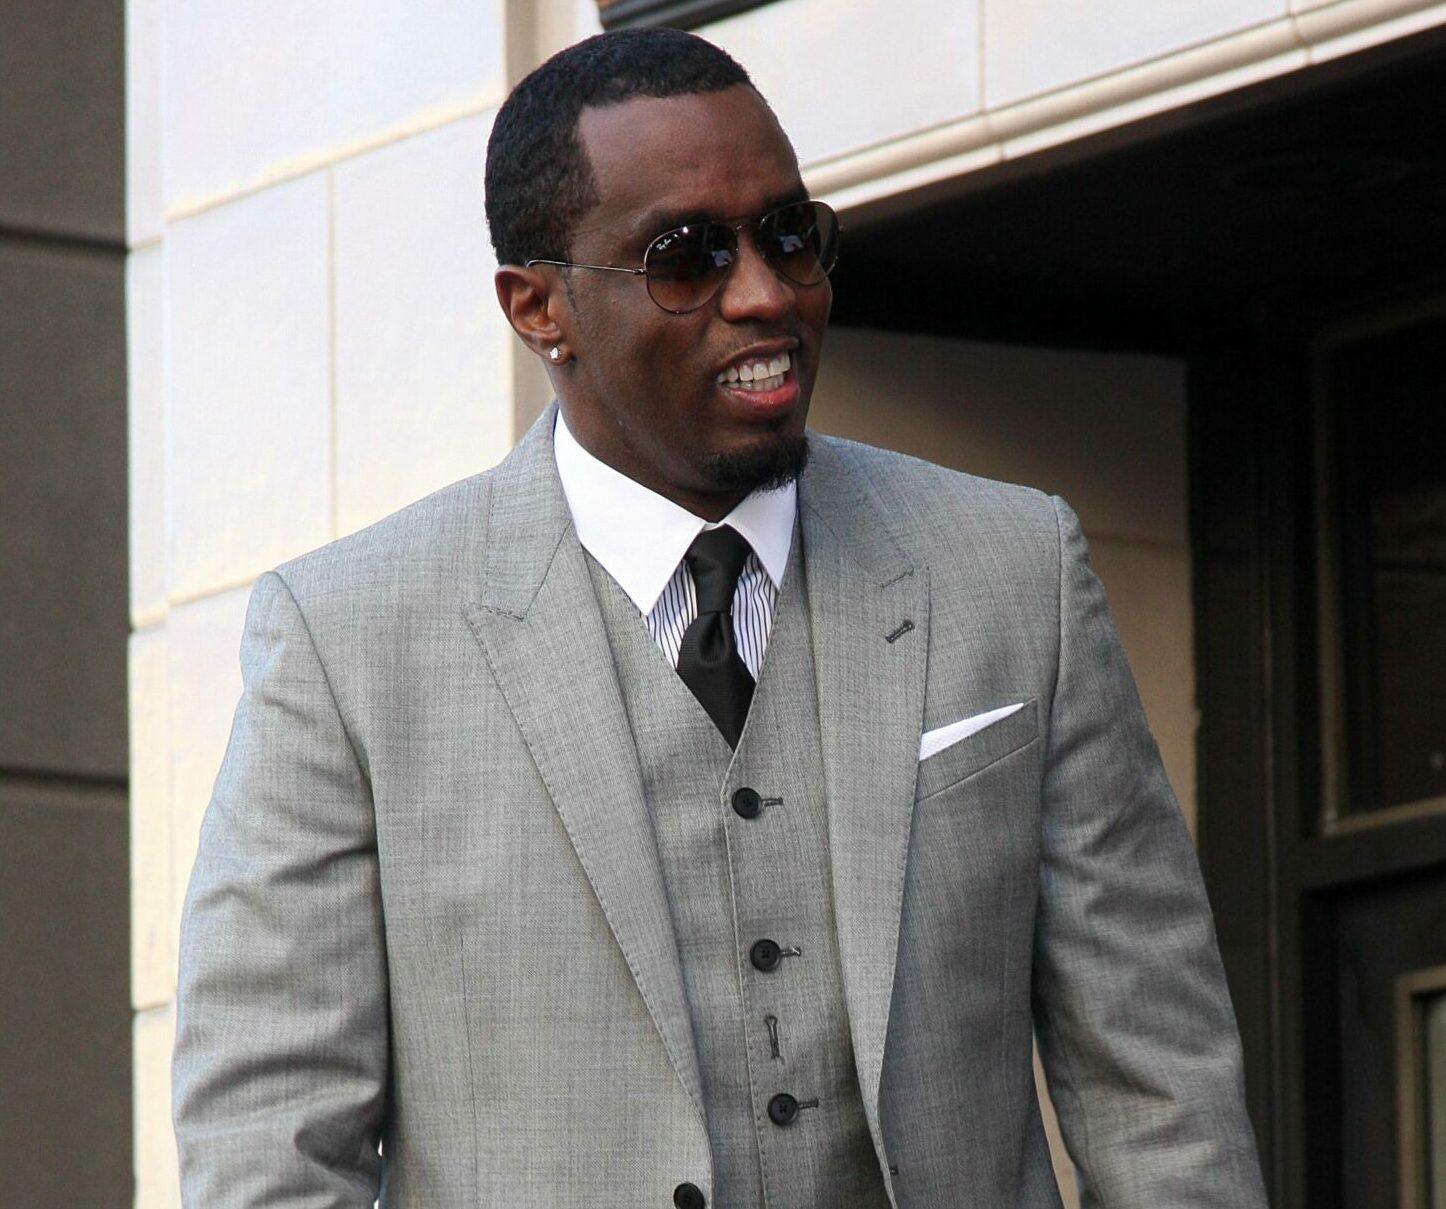 Sean Combs at the Kenny "Babyface" Edmonds Hollywood Walk of Fame Star Ceremony at Hollywood Boulevard on October 10, 2013 in Los Angeles, CA